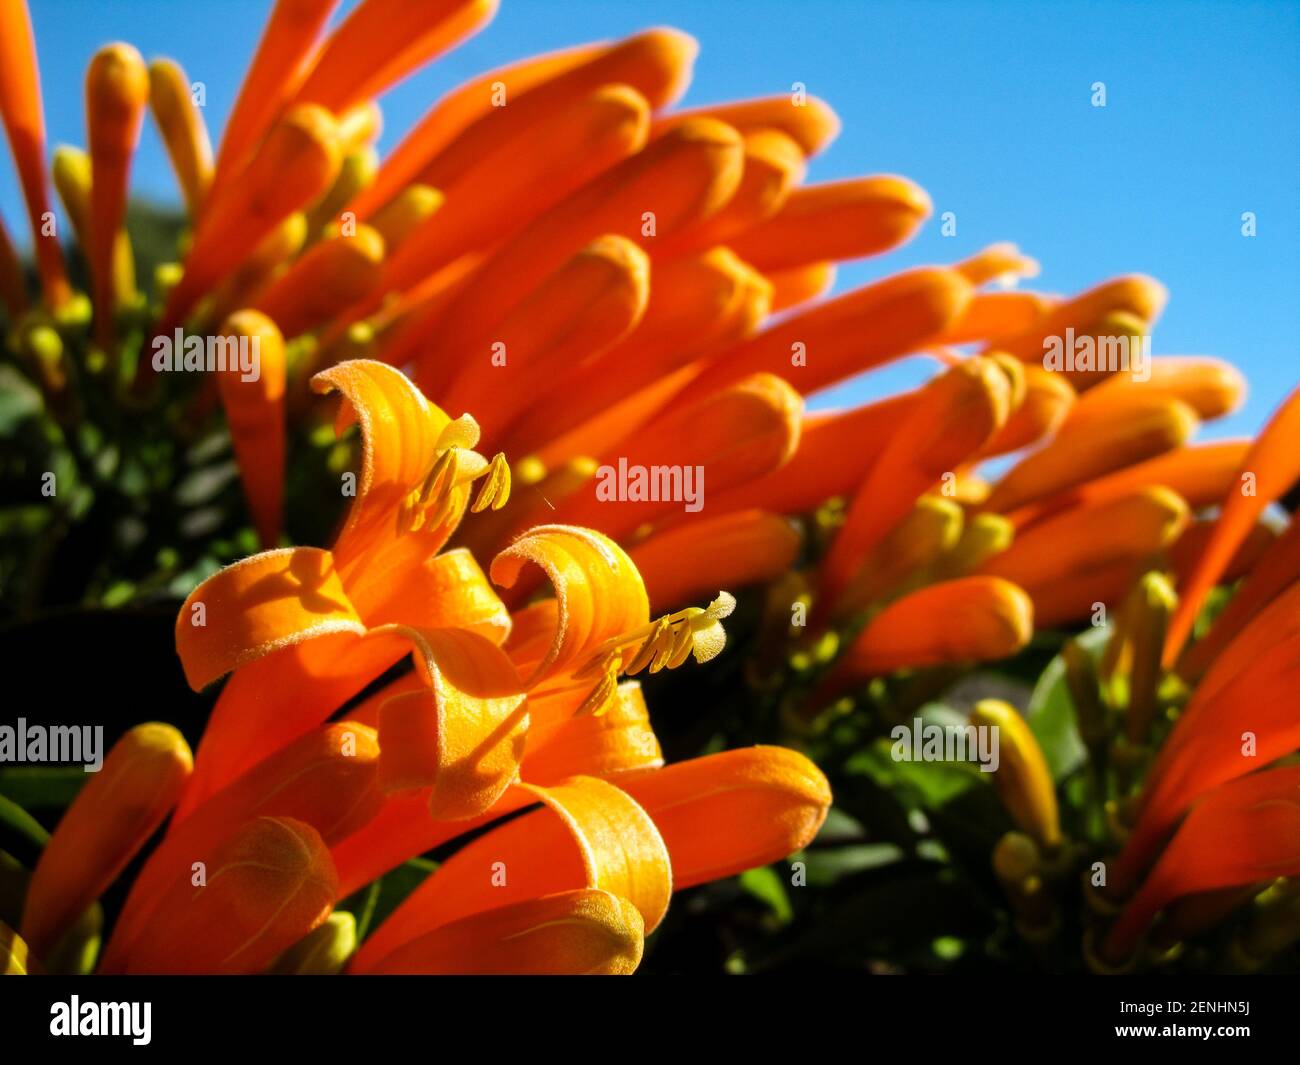 The Orange Trumpet shape flowers of the flame vine, Pyrostegia venusta, in full bloom on a clear sunny day Stock Photo